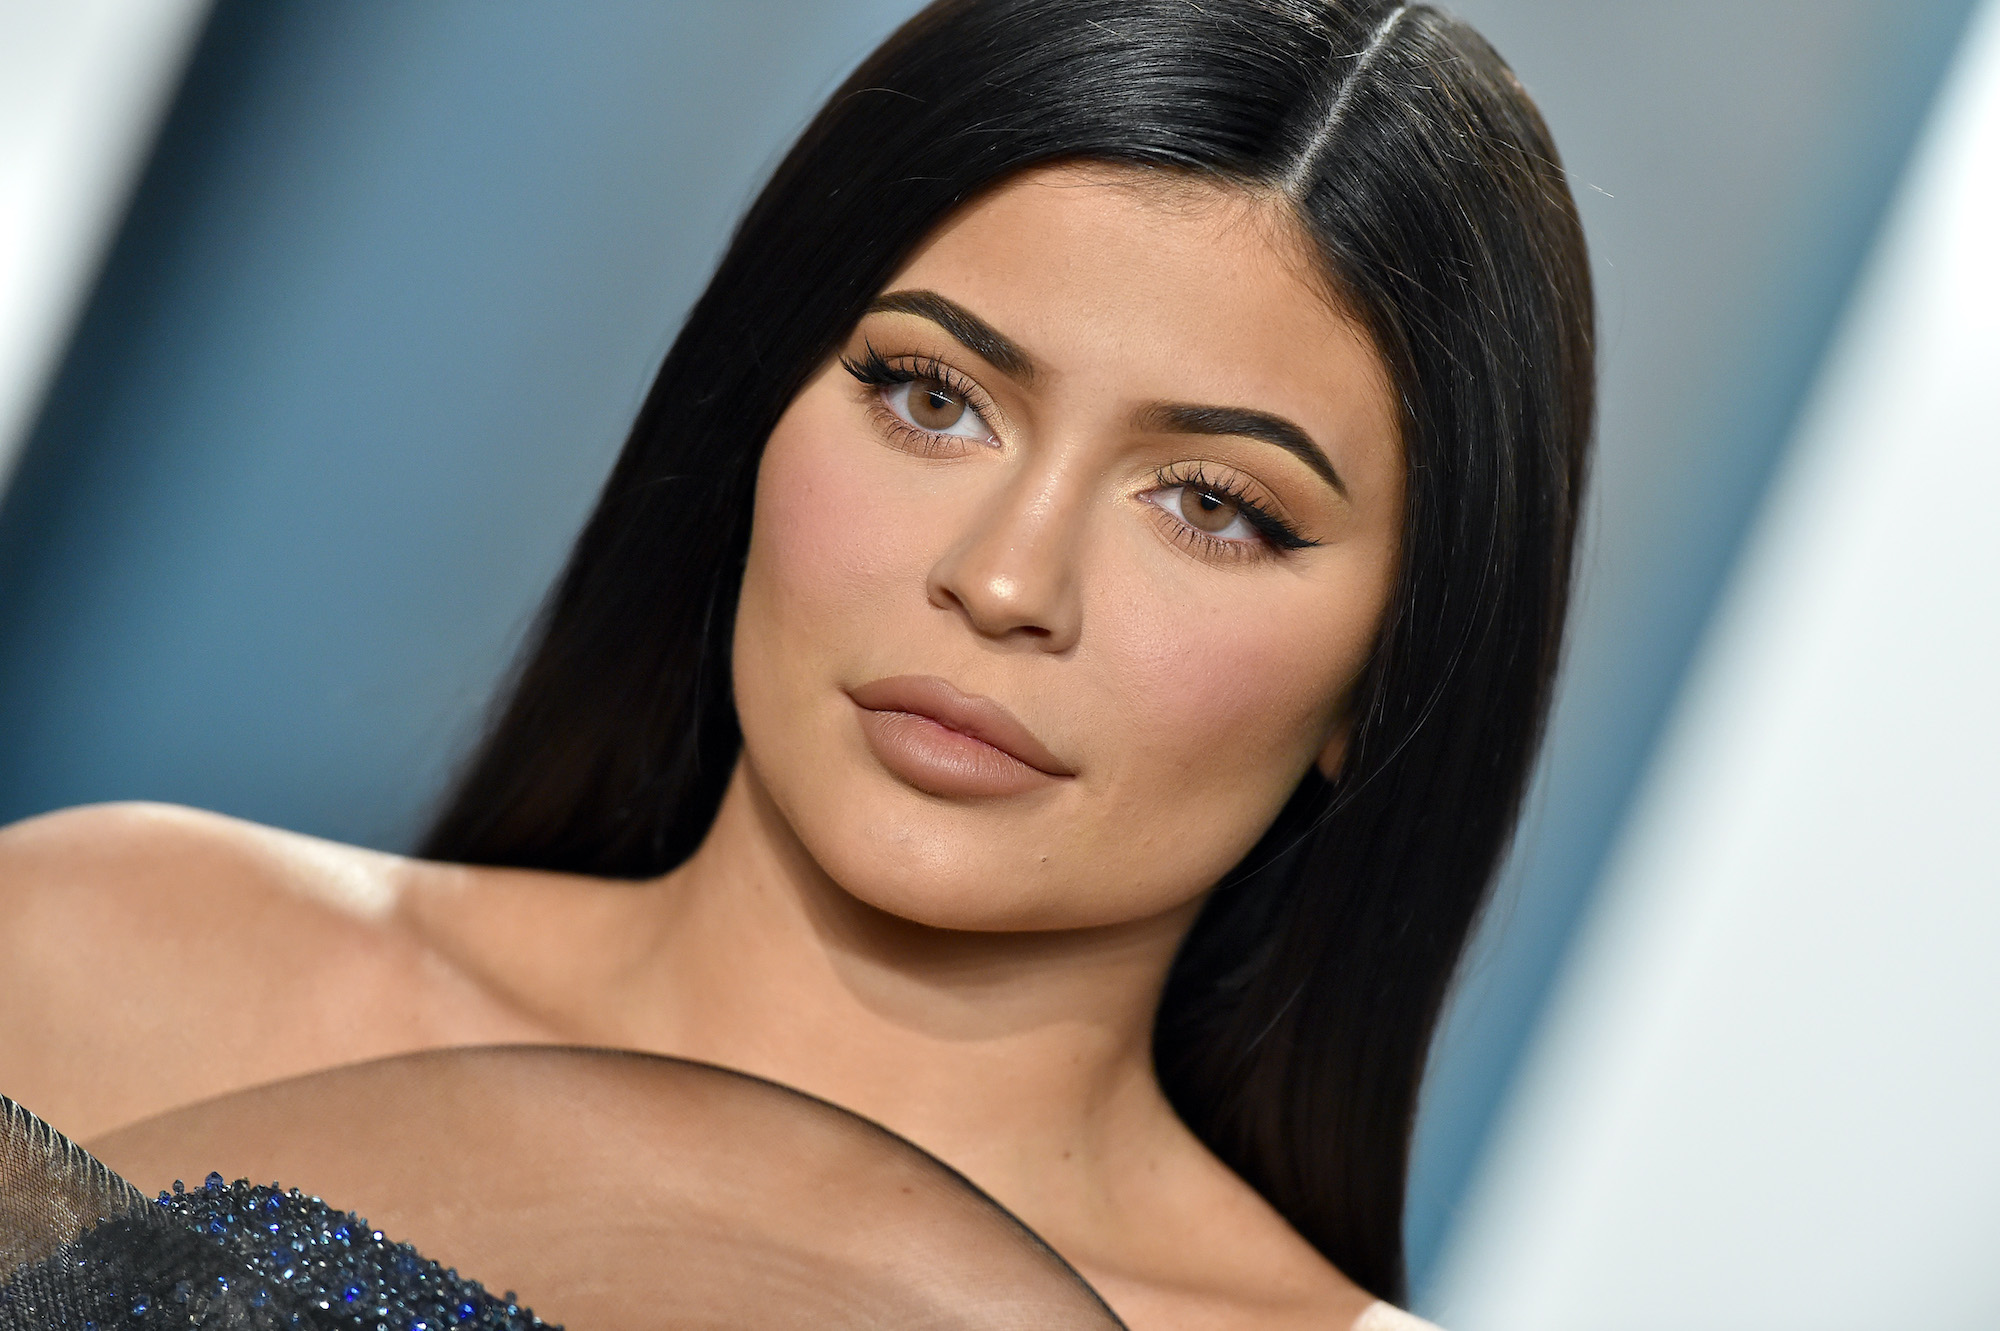 Kylie Jenner Doesn't Act 'Sweet' Like She Used to and 'KUWTK' Fans